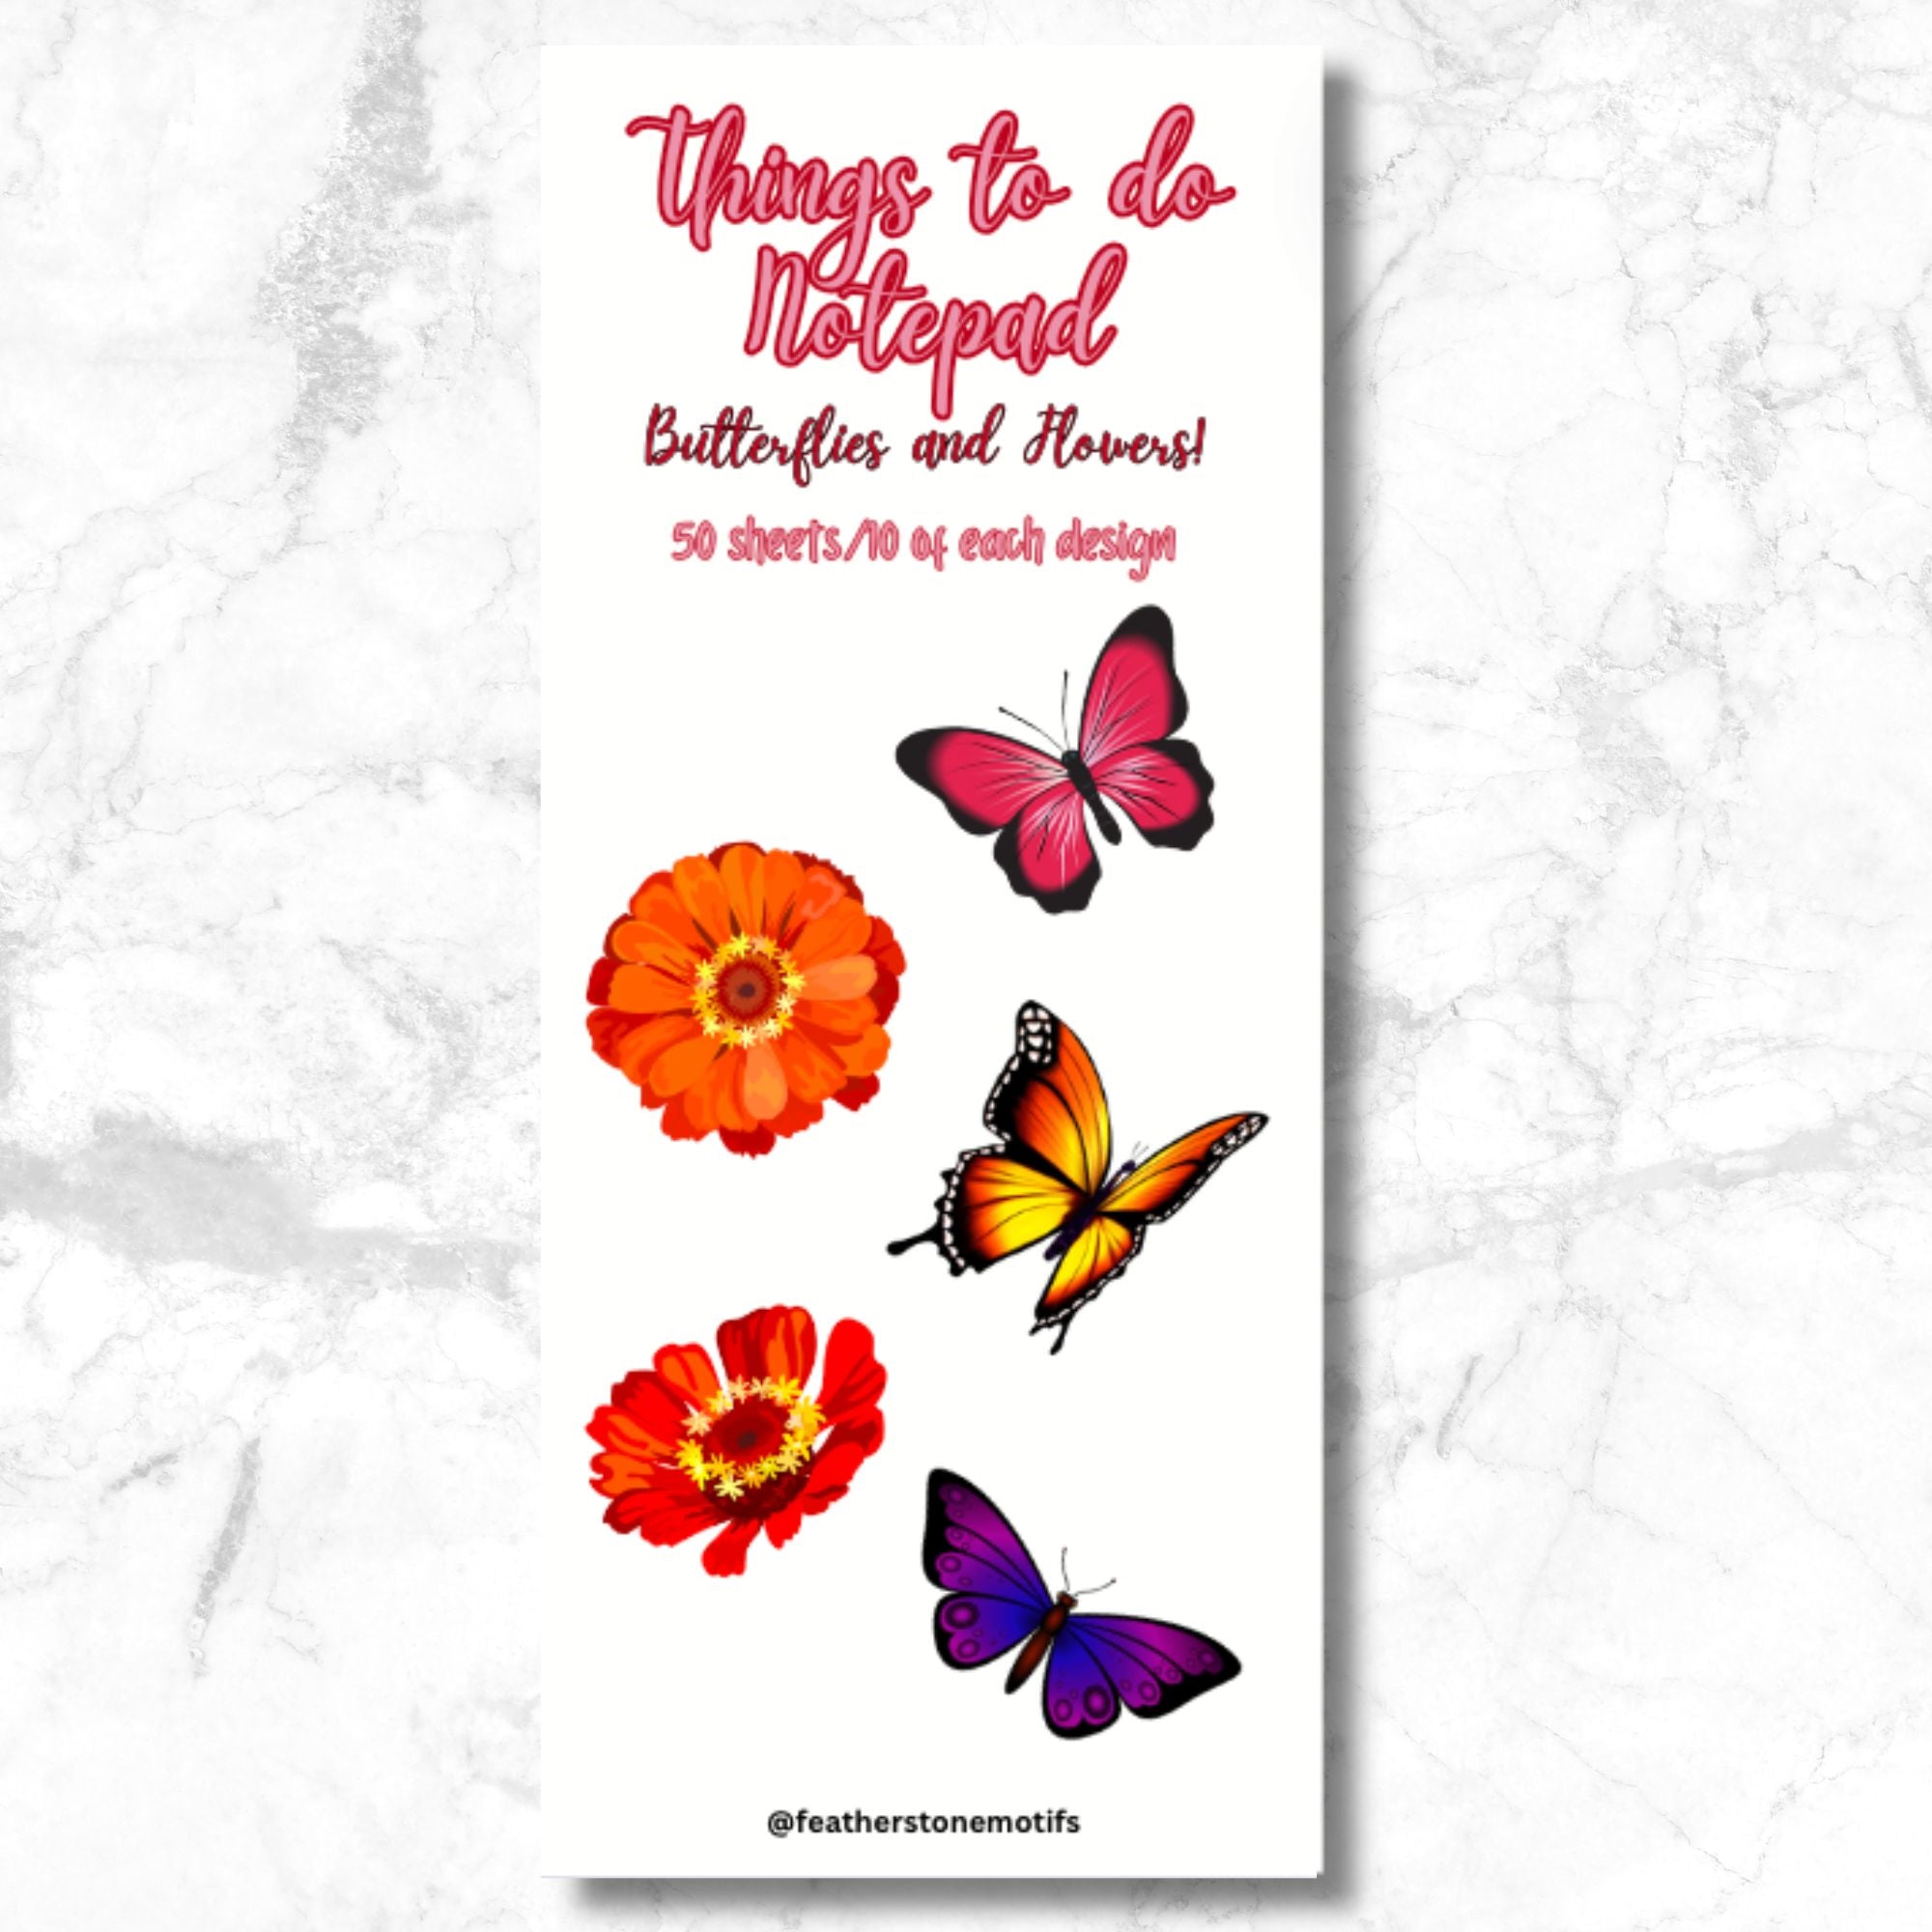 This image shows the cover page of the Things to do Notepad - Butterflies and Flowers.